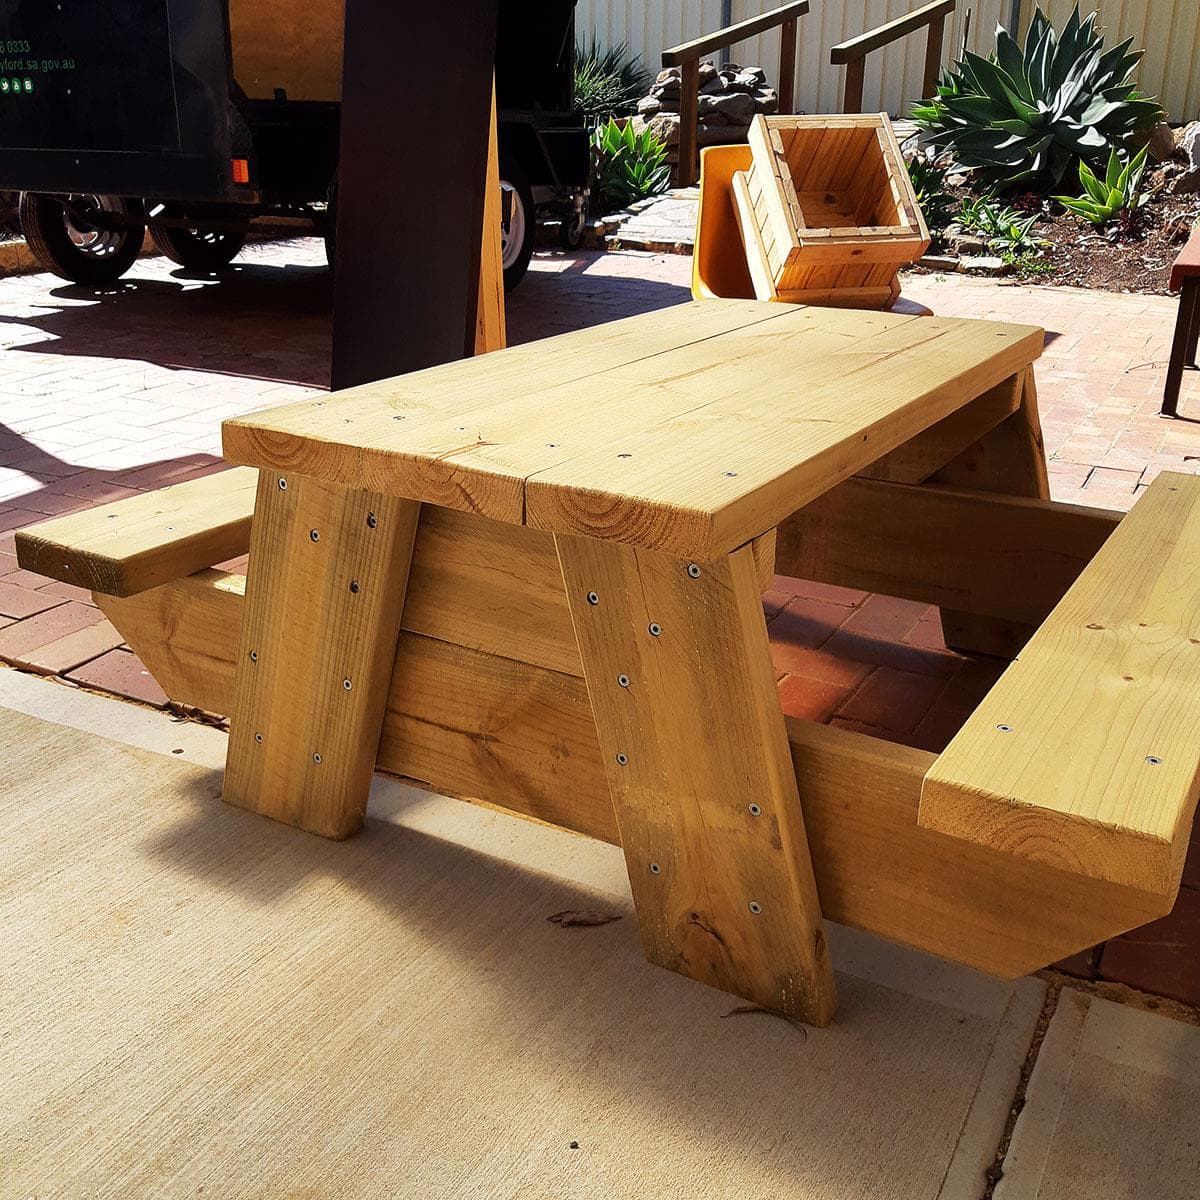 Wooden picnic table and benches